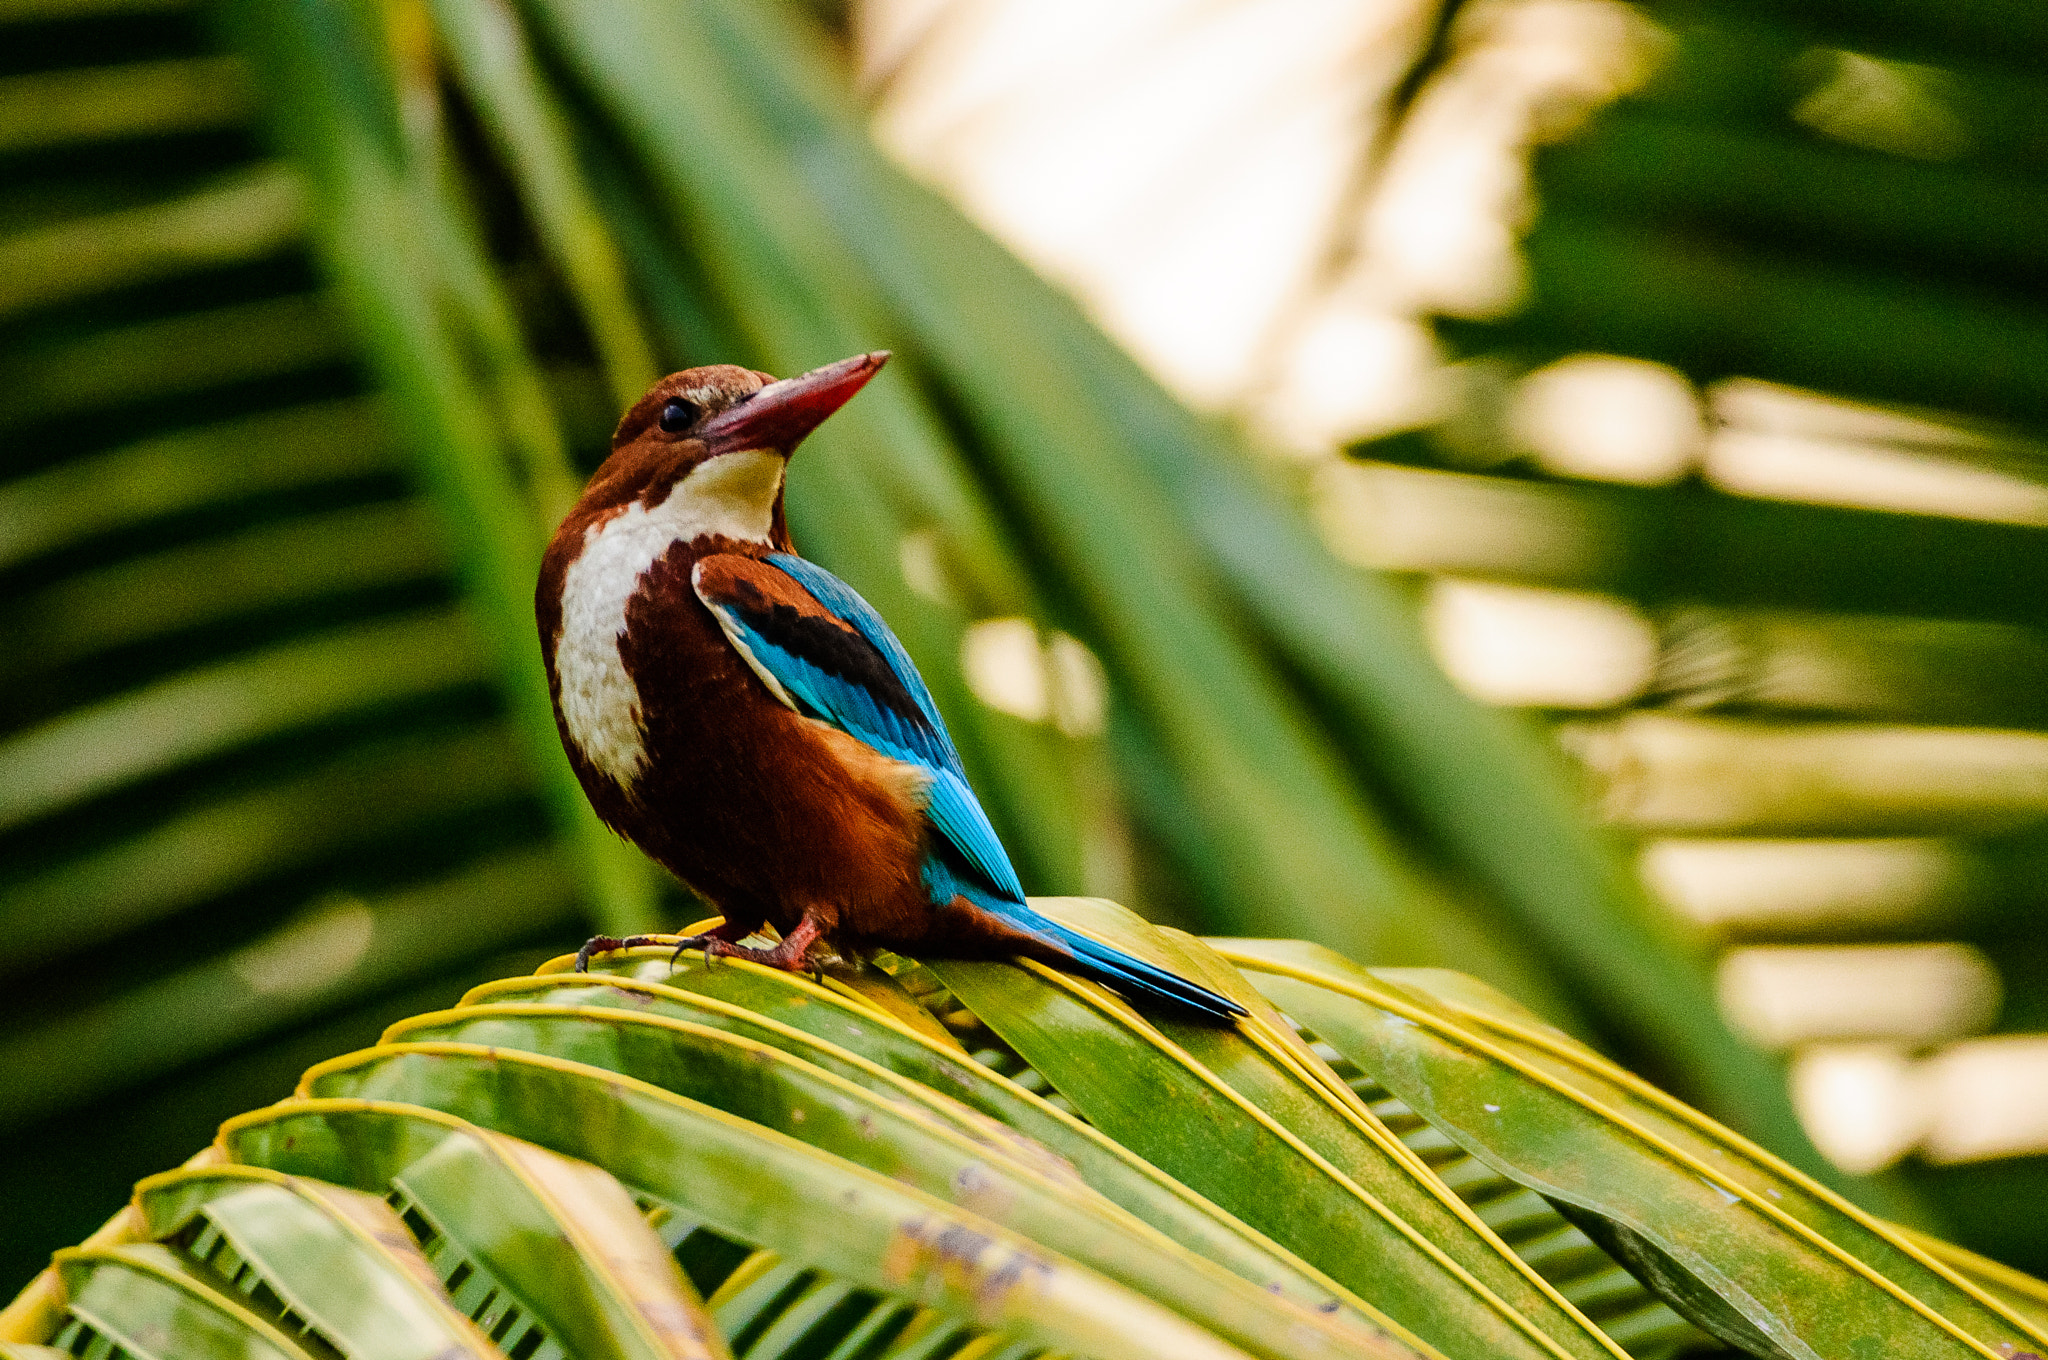 Nikon D90 + Sigma 150-600mm F5-6.3 DG OS HSM | C sample photo. Kingfisher in palms photography